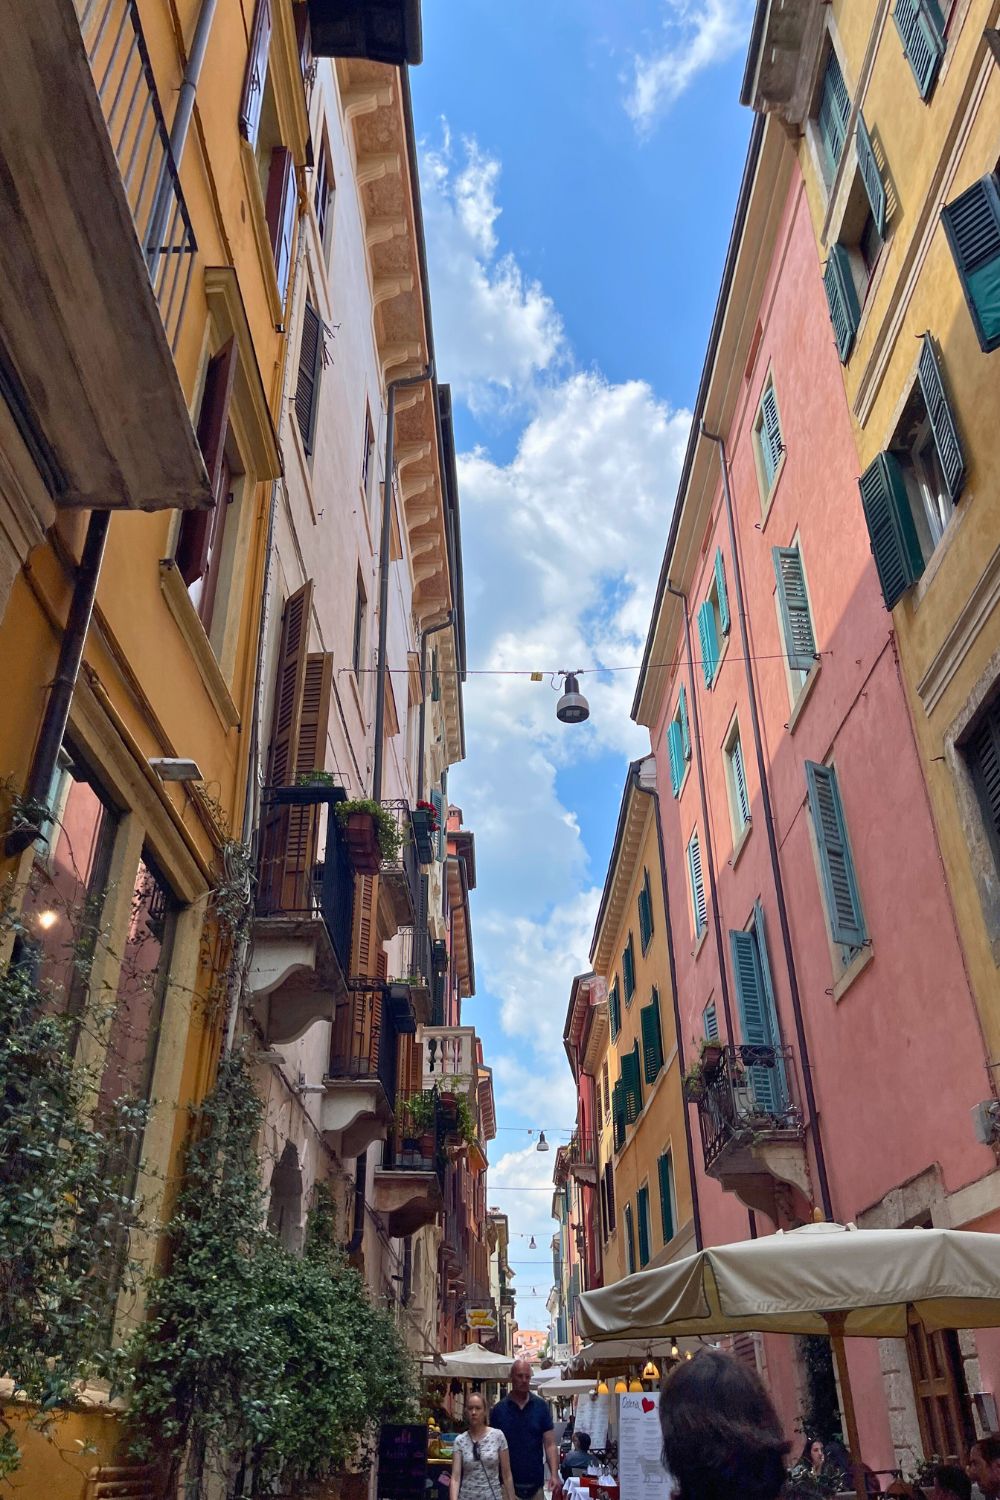 A view of a narrow street in Verona, Italy, lined with tall, colorful buildings with shutters and balconies. The sky is bright blue with fluffy white clouds, and the street is adorned with greenery and people walking below.